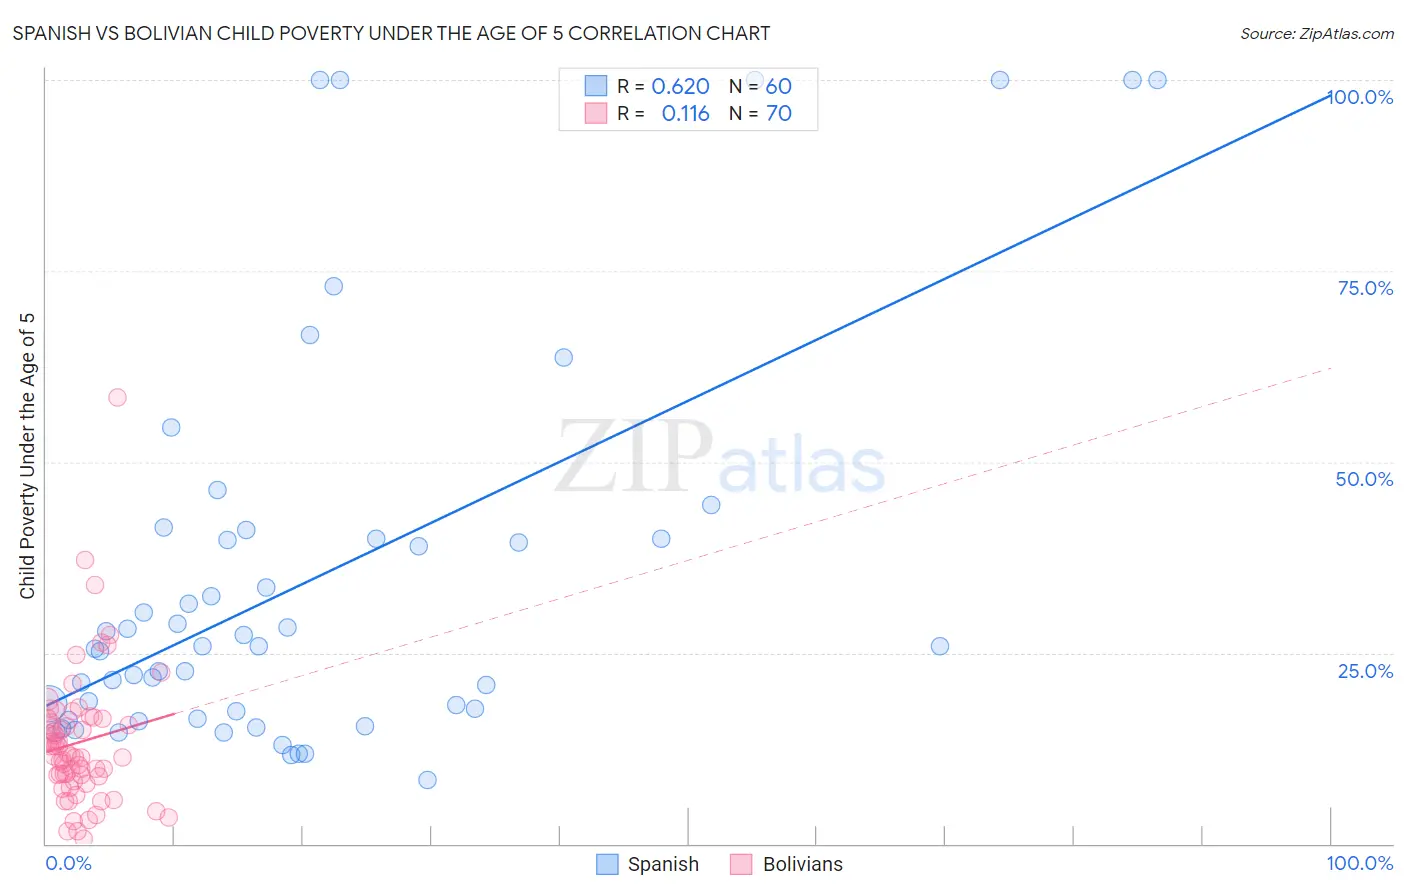 Spanish vs Bolivian Child Poverty Under the Age of 5